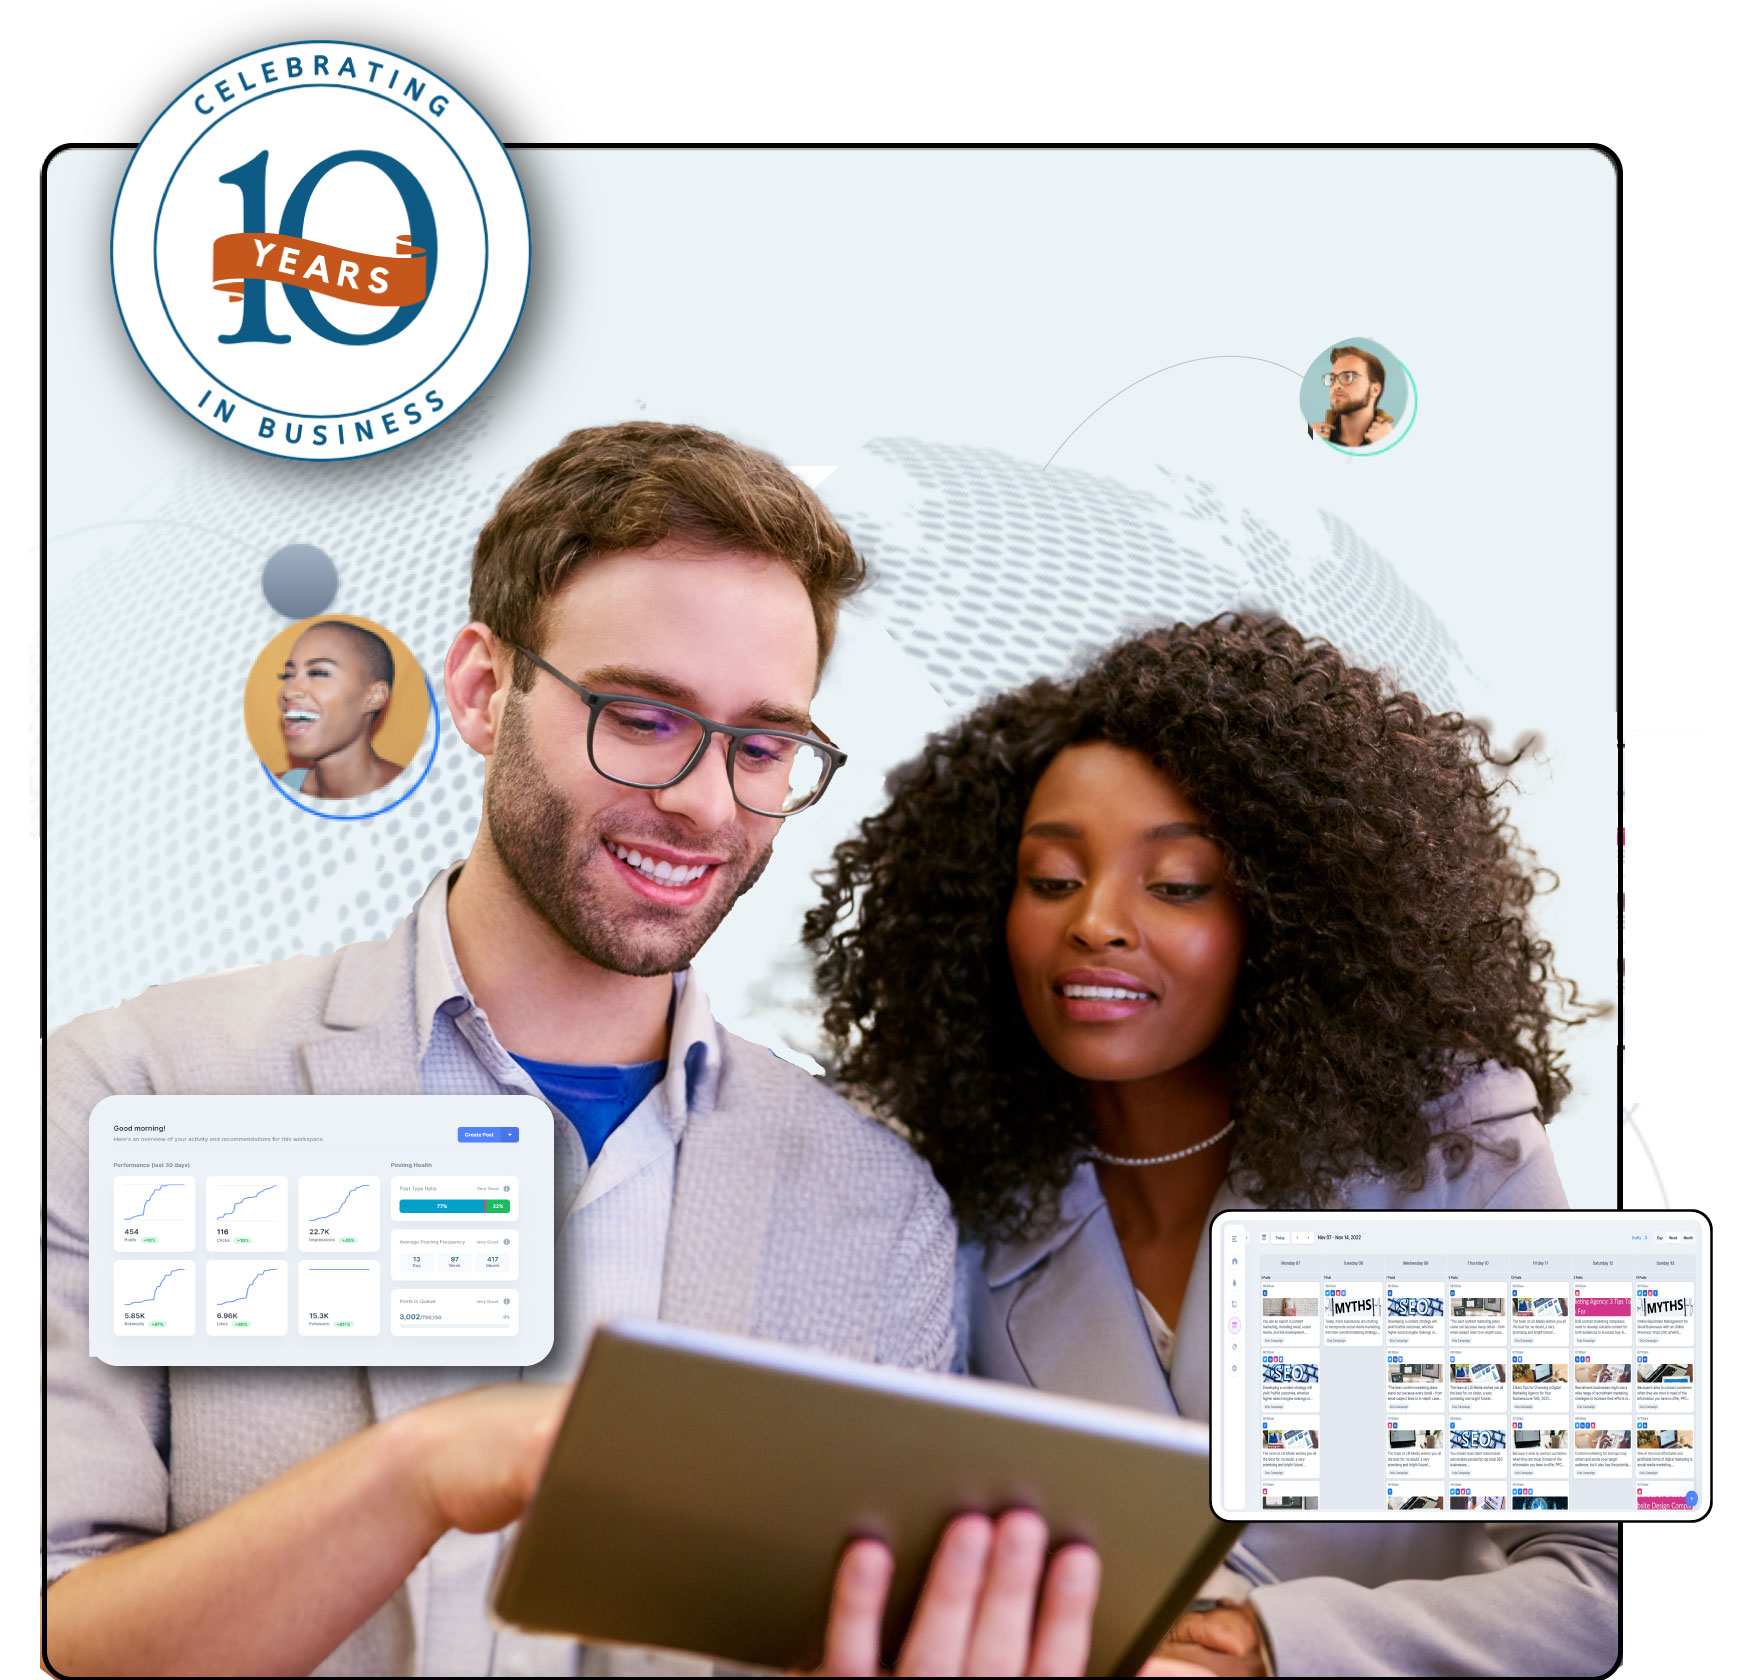 A man and woman looking at and holding a tablet with an abstract globe background and small images of social media metrics and statistics floating around him.